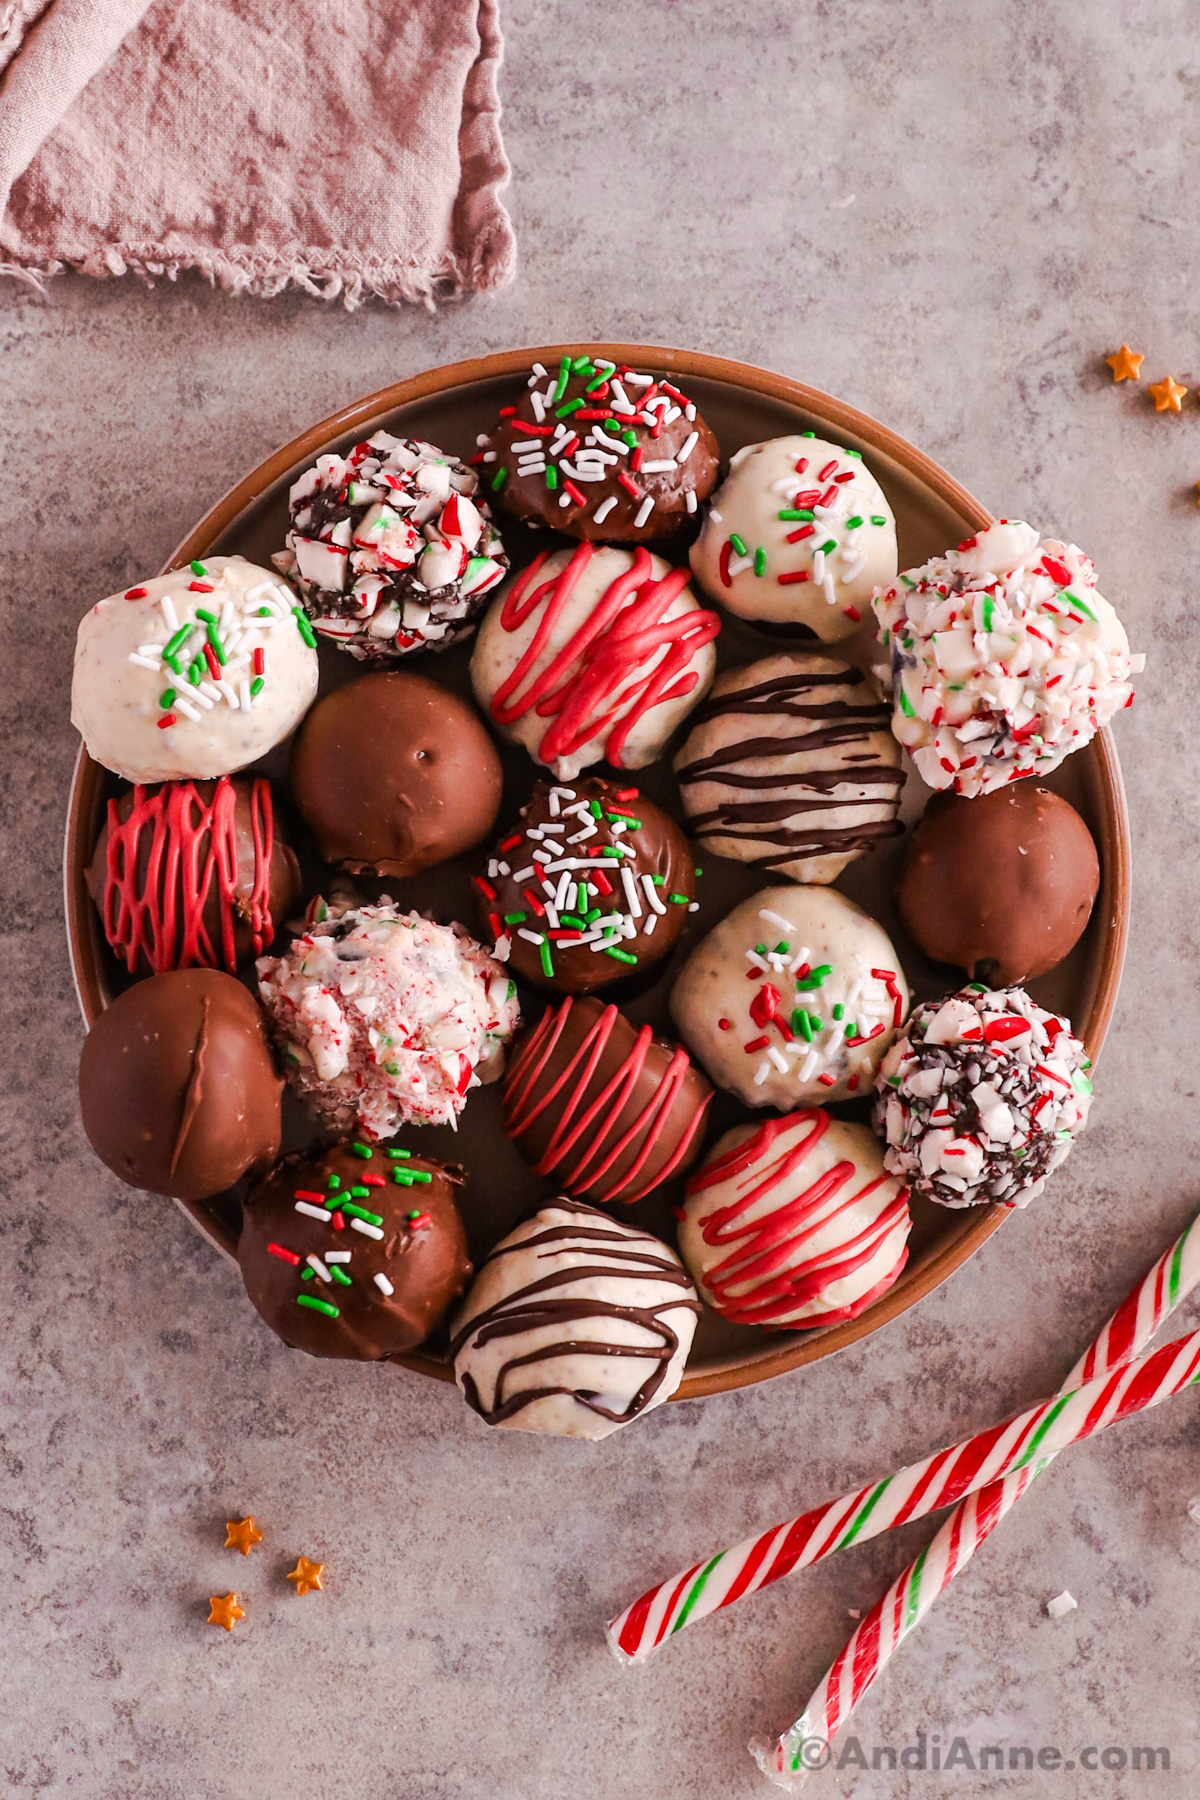 A plate of Oreo truffle balls, some white chocolate some milk chocolate. Some with sprinkles or crushed candy canes, some dipped with chocolate.